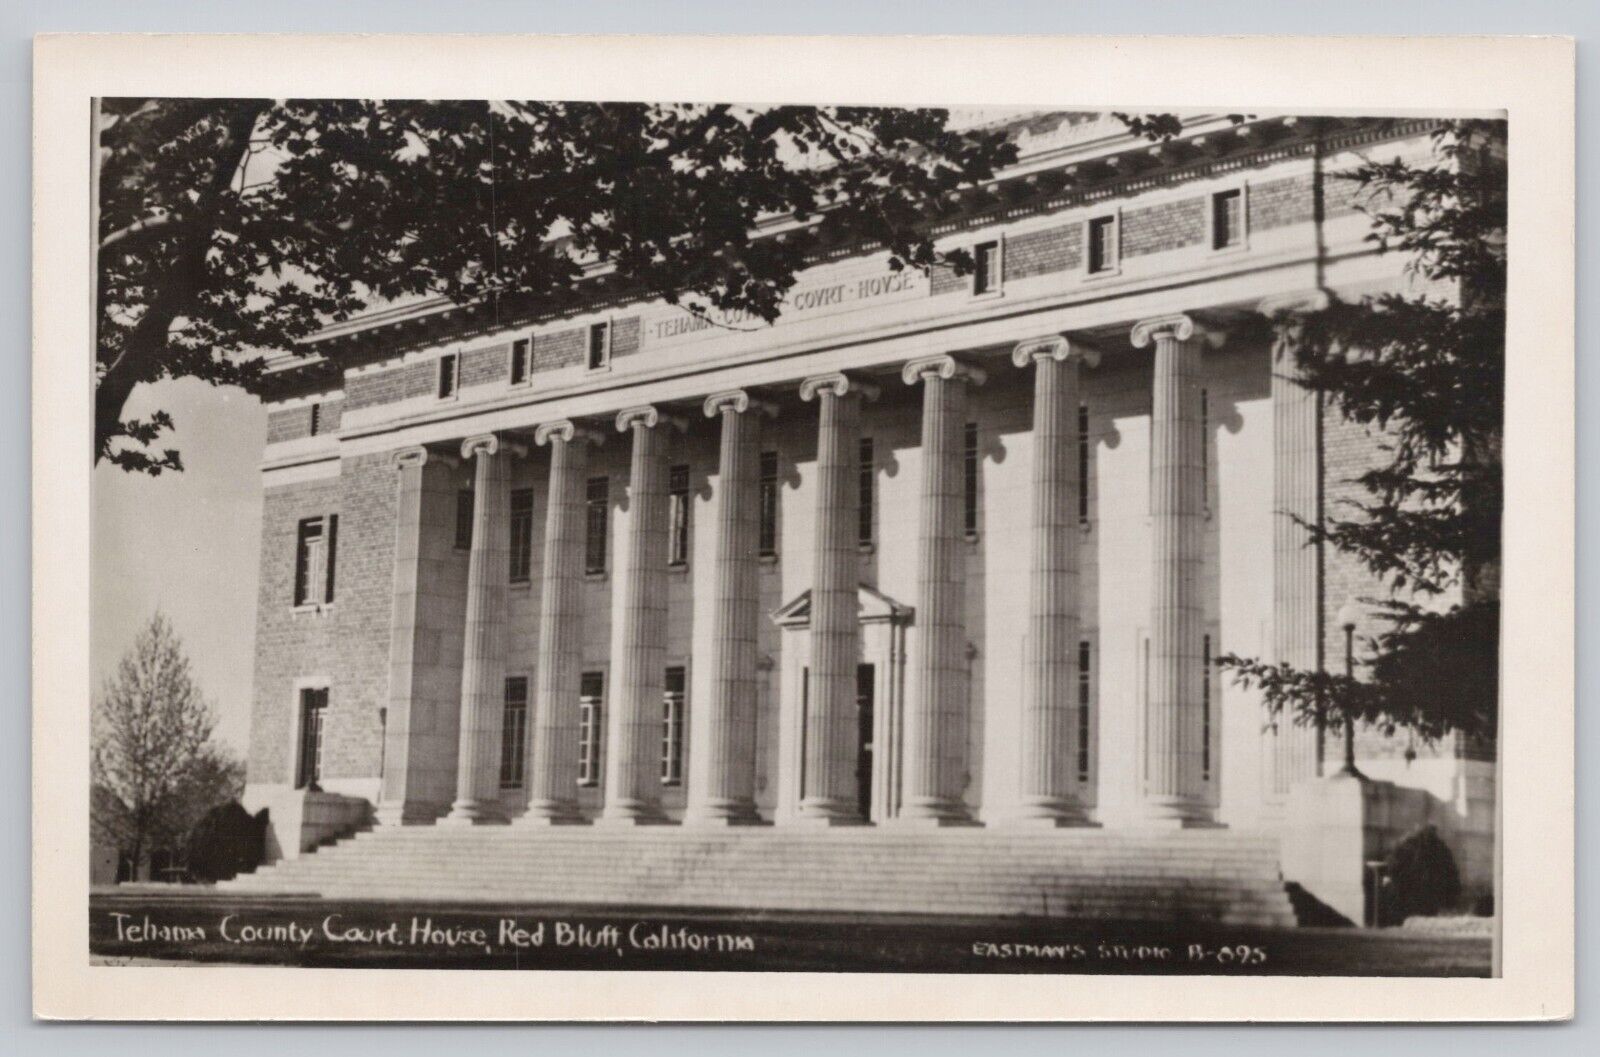 Red Bluff California, Tehama County Court House Vintage RPPC Real Photo Postcard